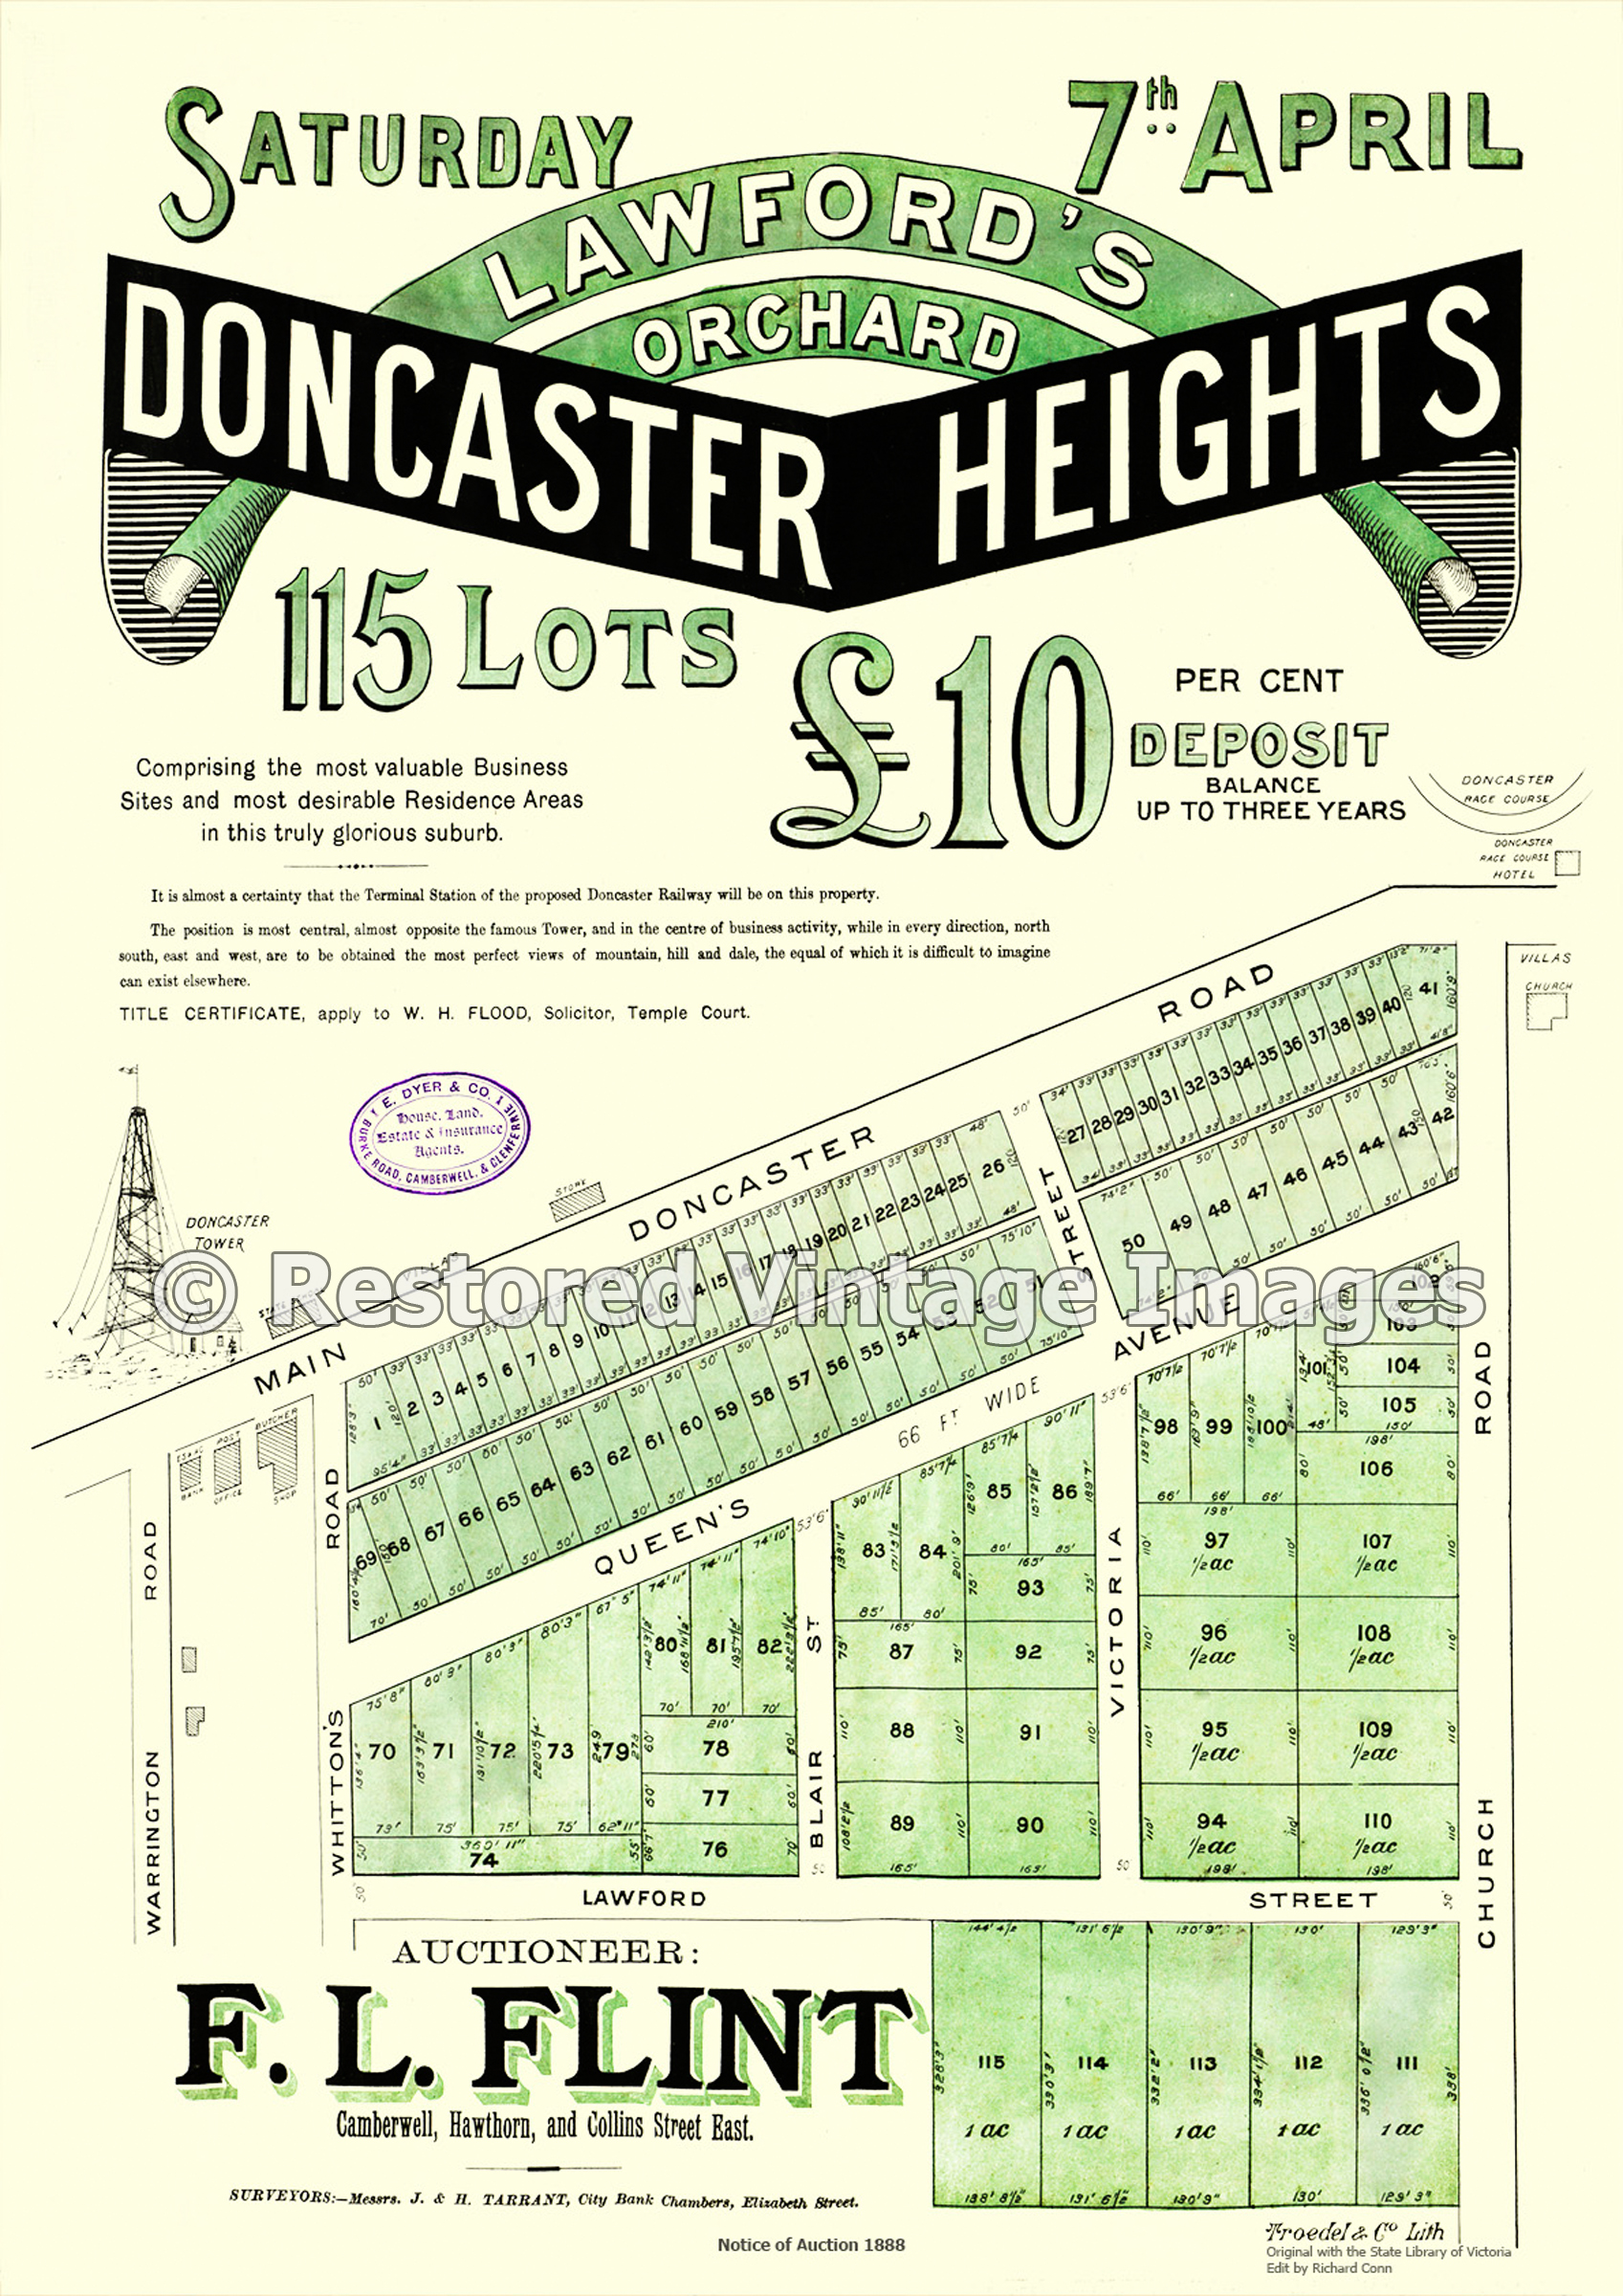 Doncaster Heights Lawford’s Orchard 1888 – Doncaster